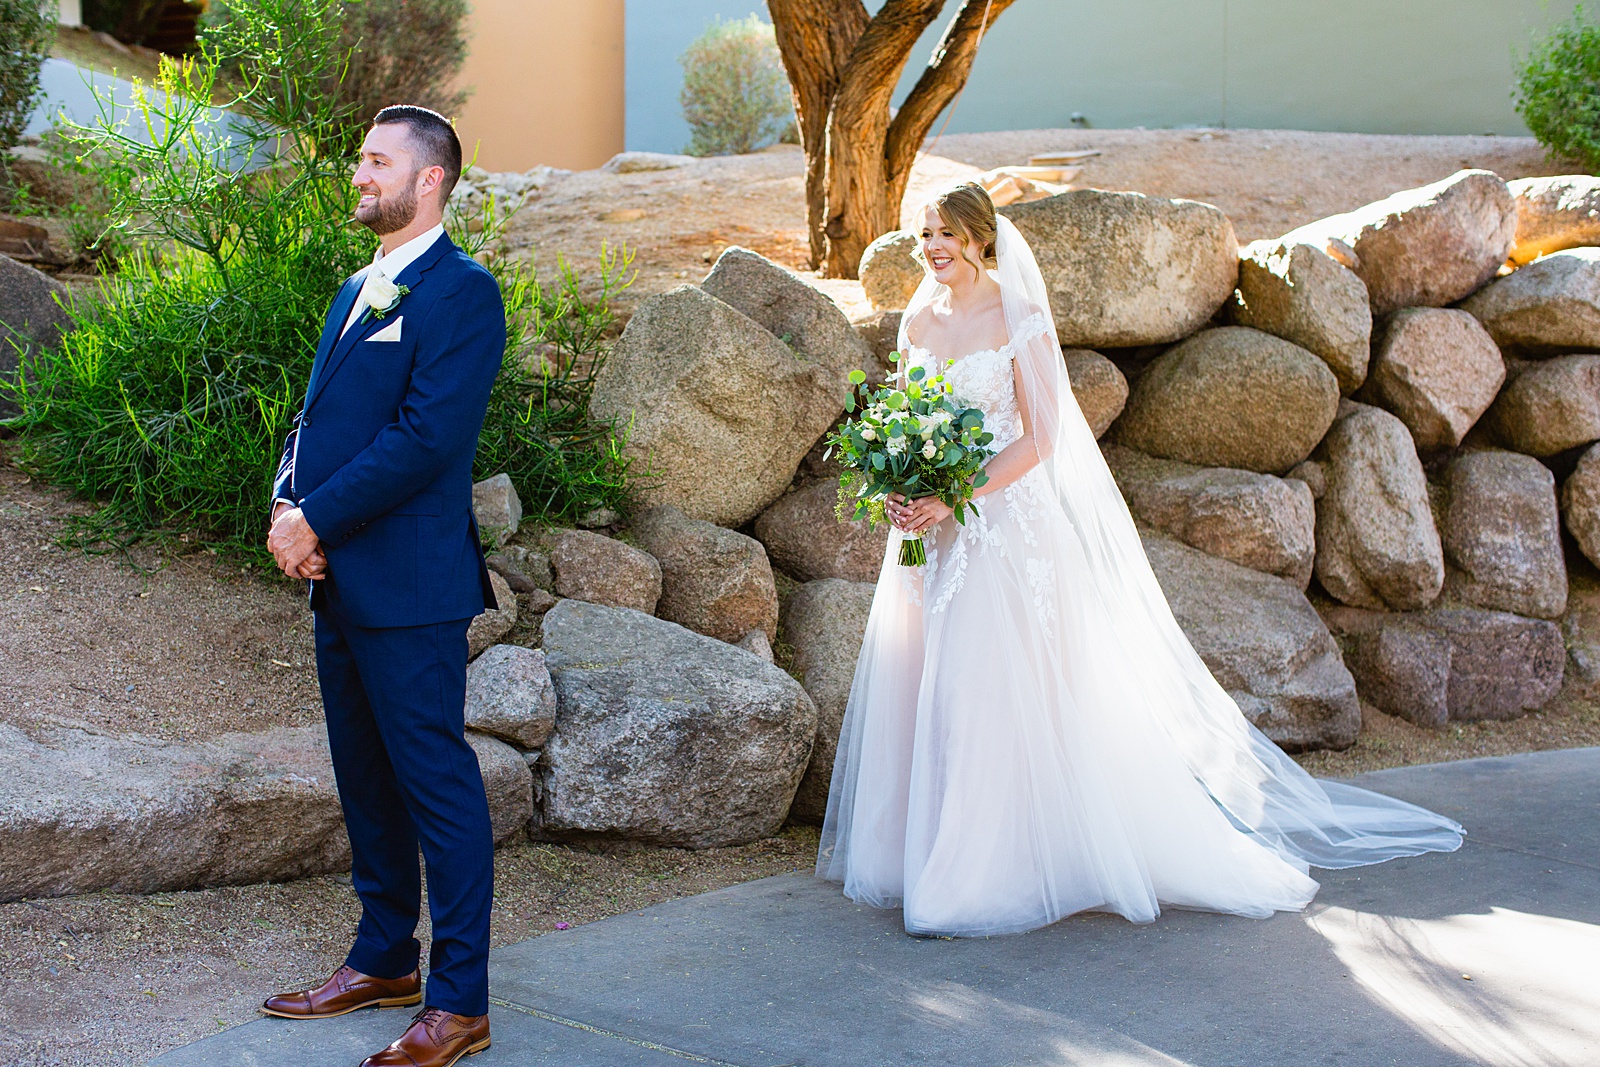 Bride & Groom's first look at Sanctuary at Camelback by Phoenix wedding photographer Juniper and Co Photography.